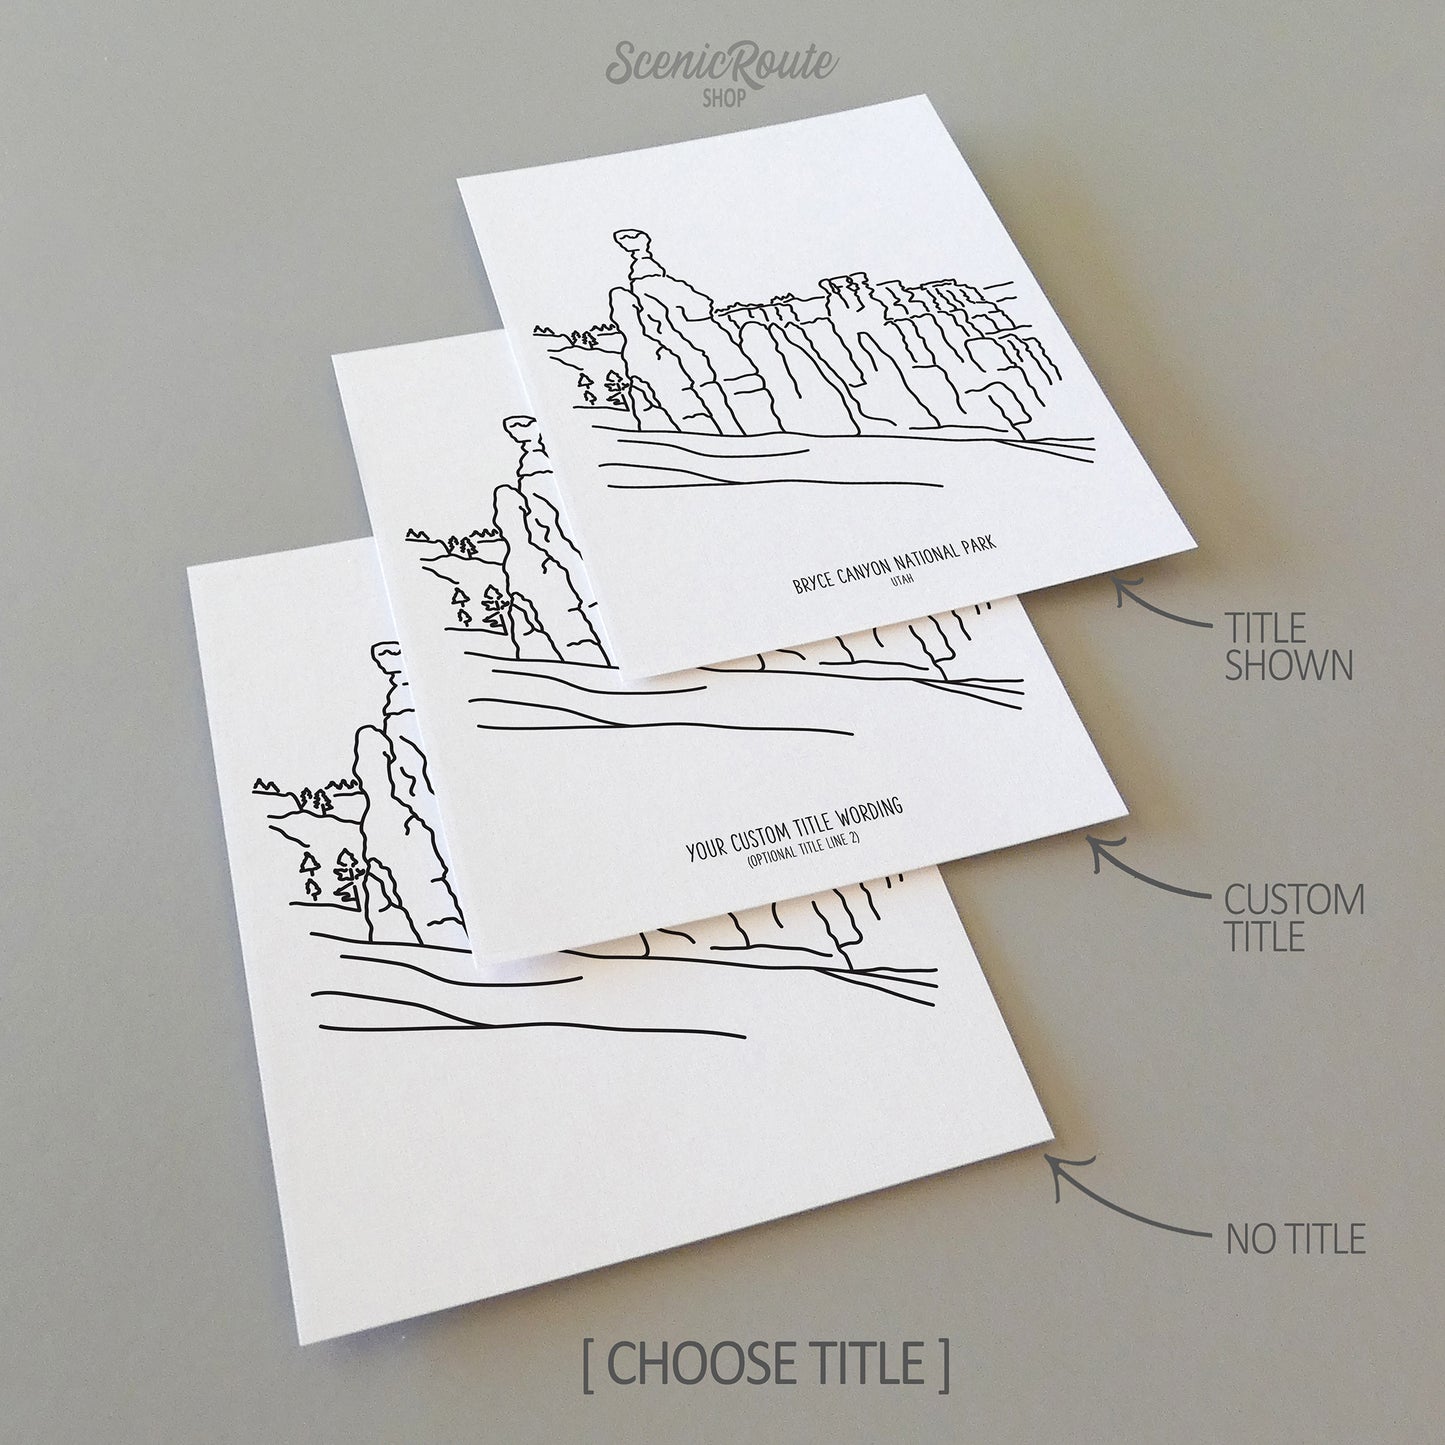 Three line art drawings of Bryce Canyon National Park on white linen paper with a gray background. The pieces are shown with title options that can be chosen and personalized.